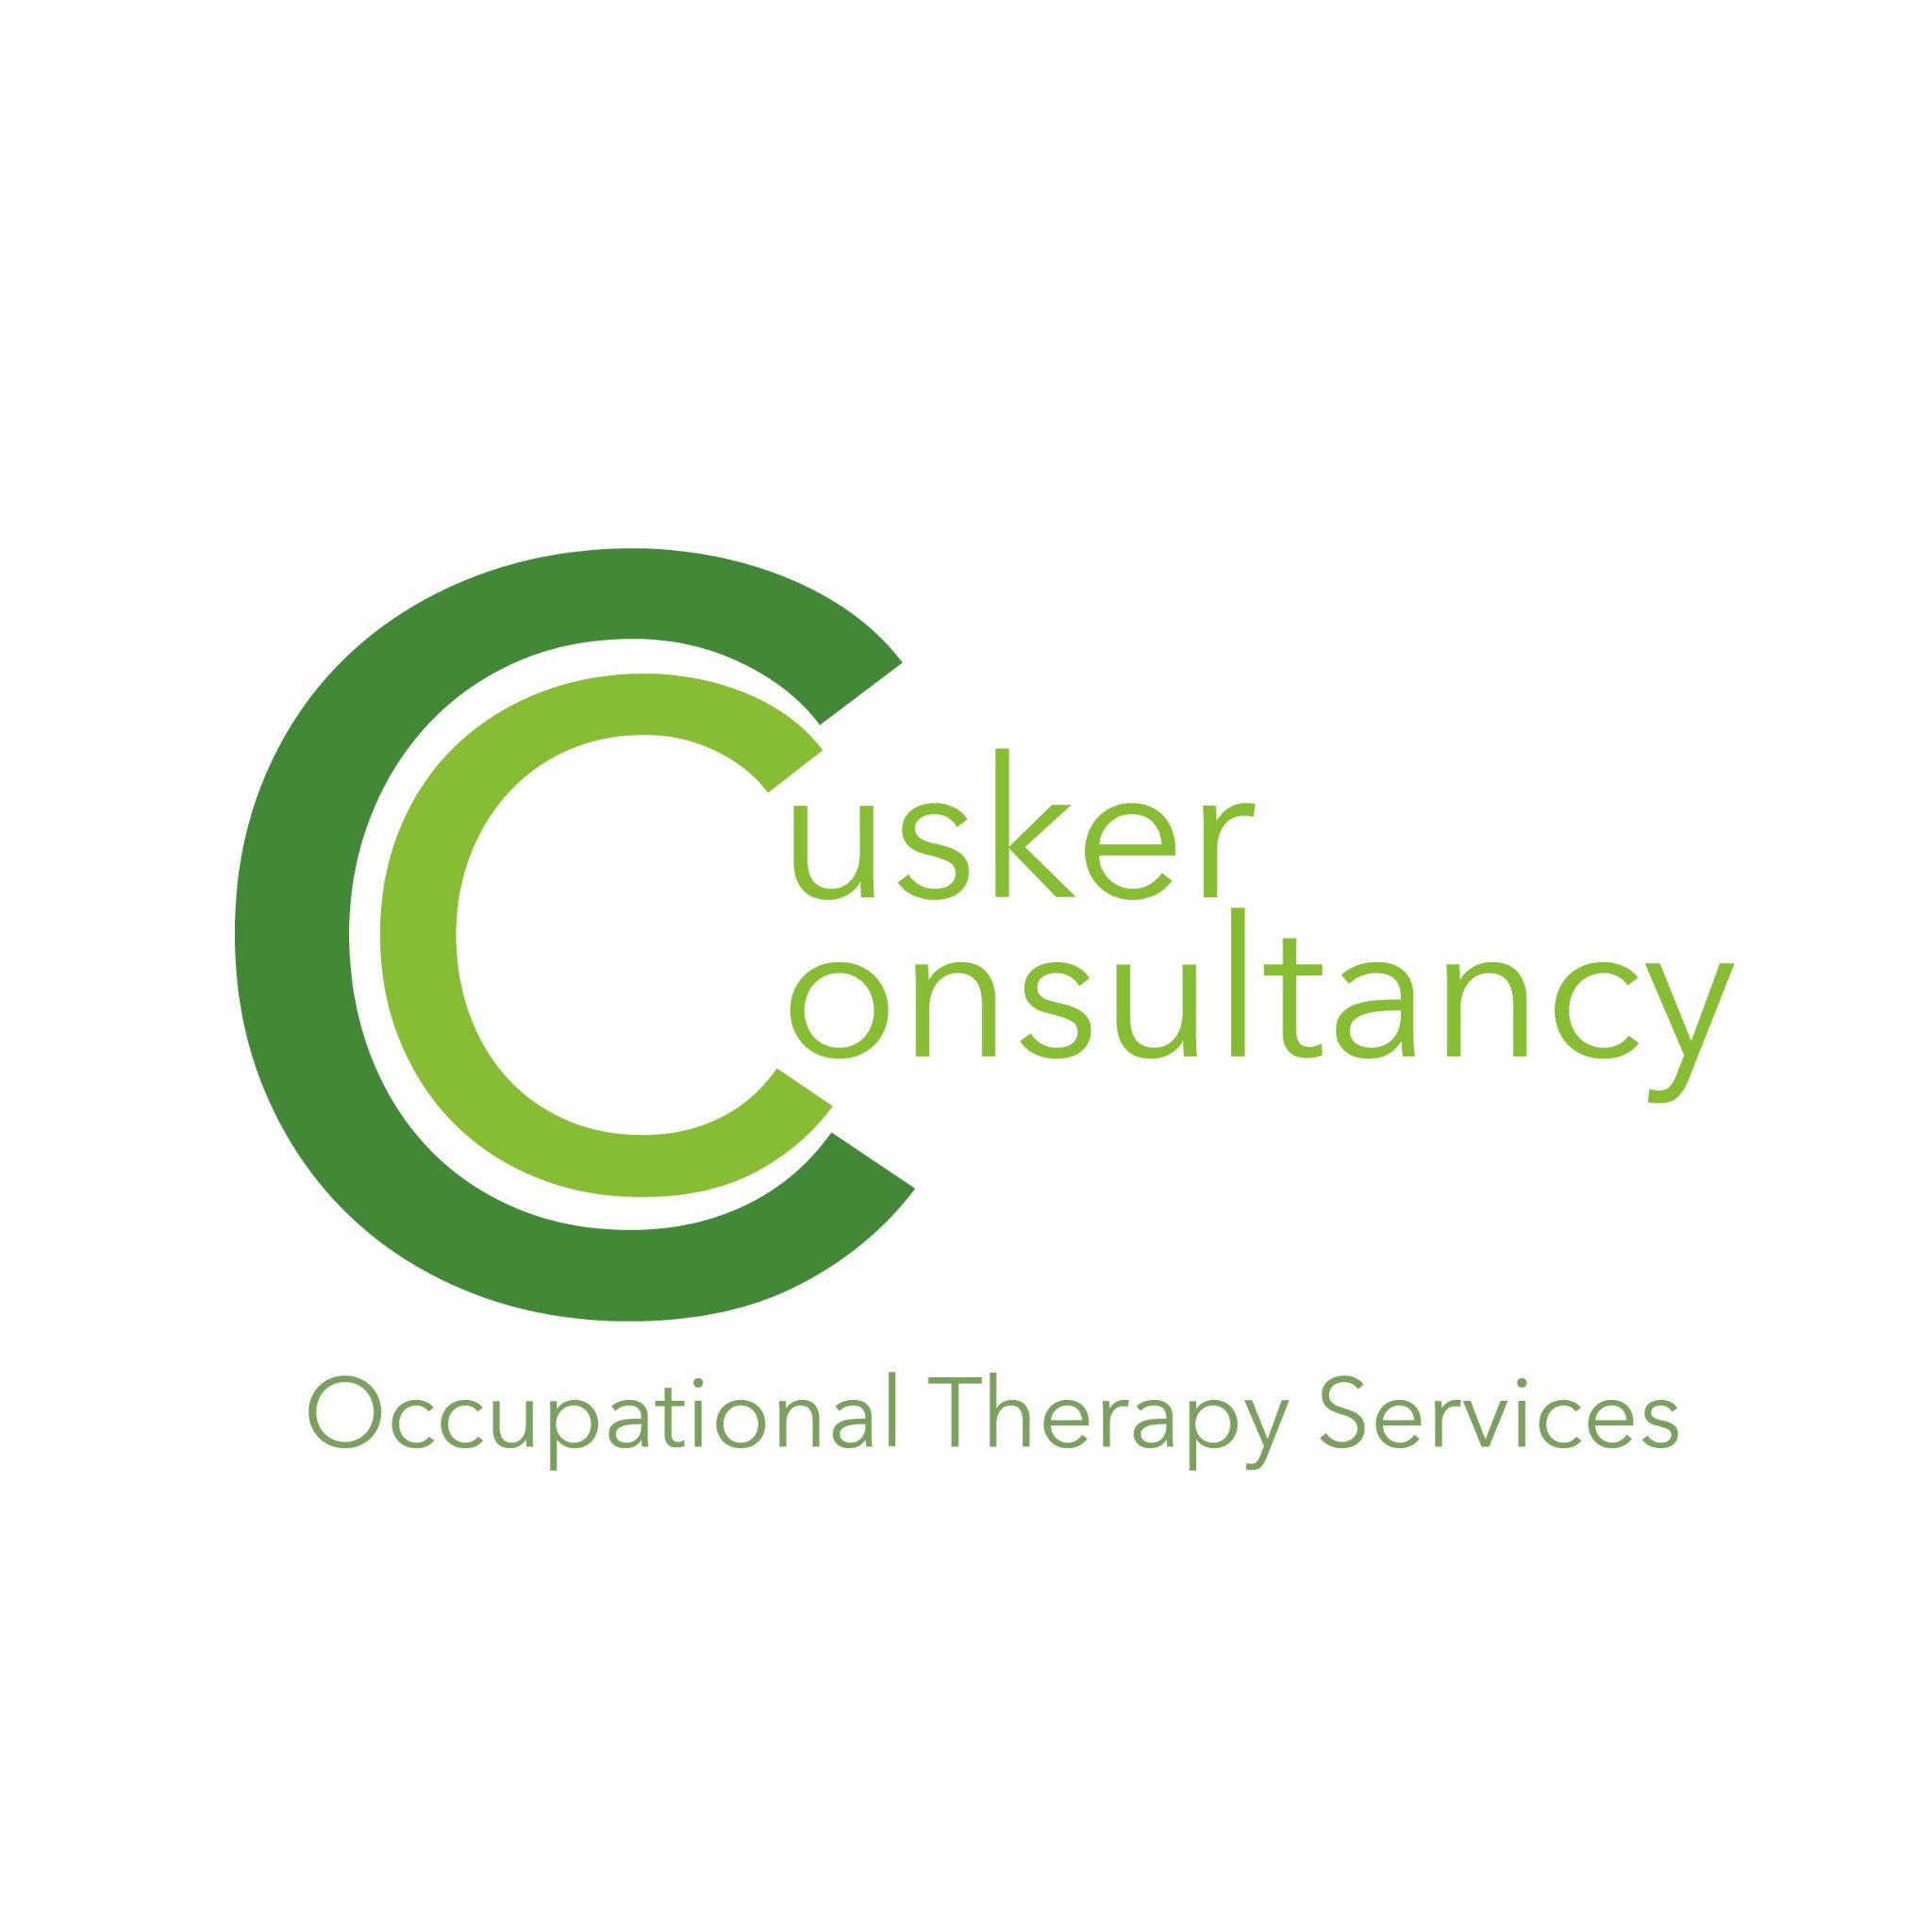 Cusker Consultancy provides independent Occupational Therapy and Case Management services in the Yorkshire region